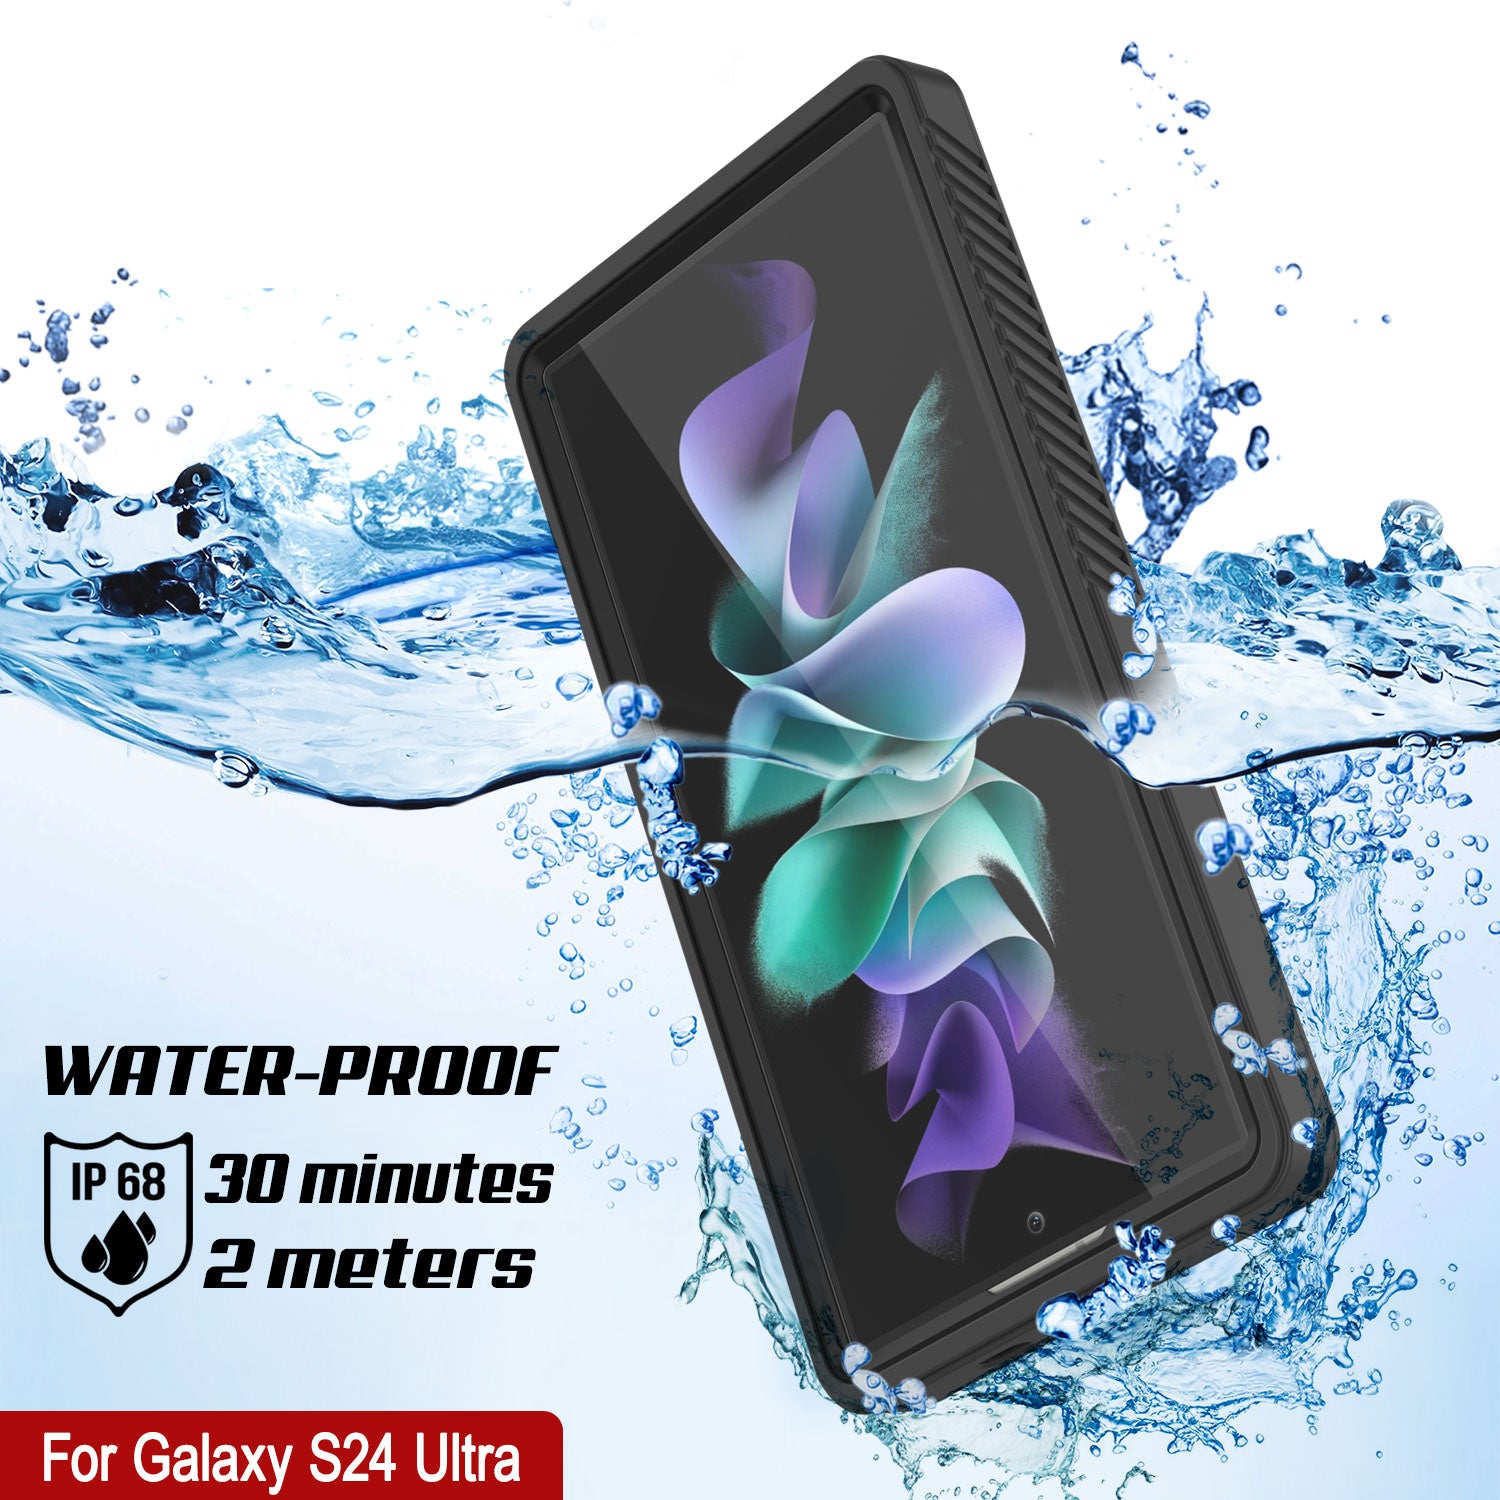 https://www.punkcase.com/cdn/shop/files/galaxy-S24-ultra-waterproof-case-extreme-series-ultra-slim-fit-innovative-design-ip68-certified-advanced-sealing-scratch-resistant-shockproof-dirtproof-snowproof-armor-cover-for-galax_8d5c02c8-855f-4079-9e54-87590c137e25.jpg?v=1704836576